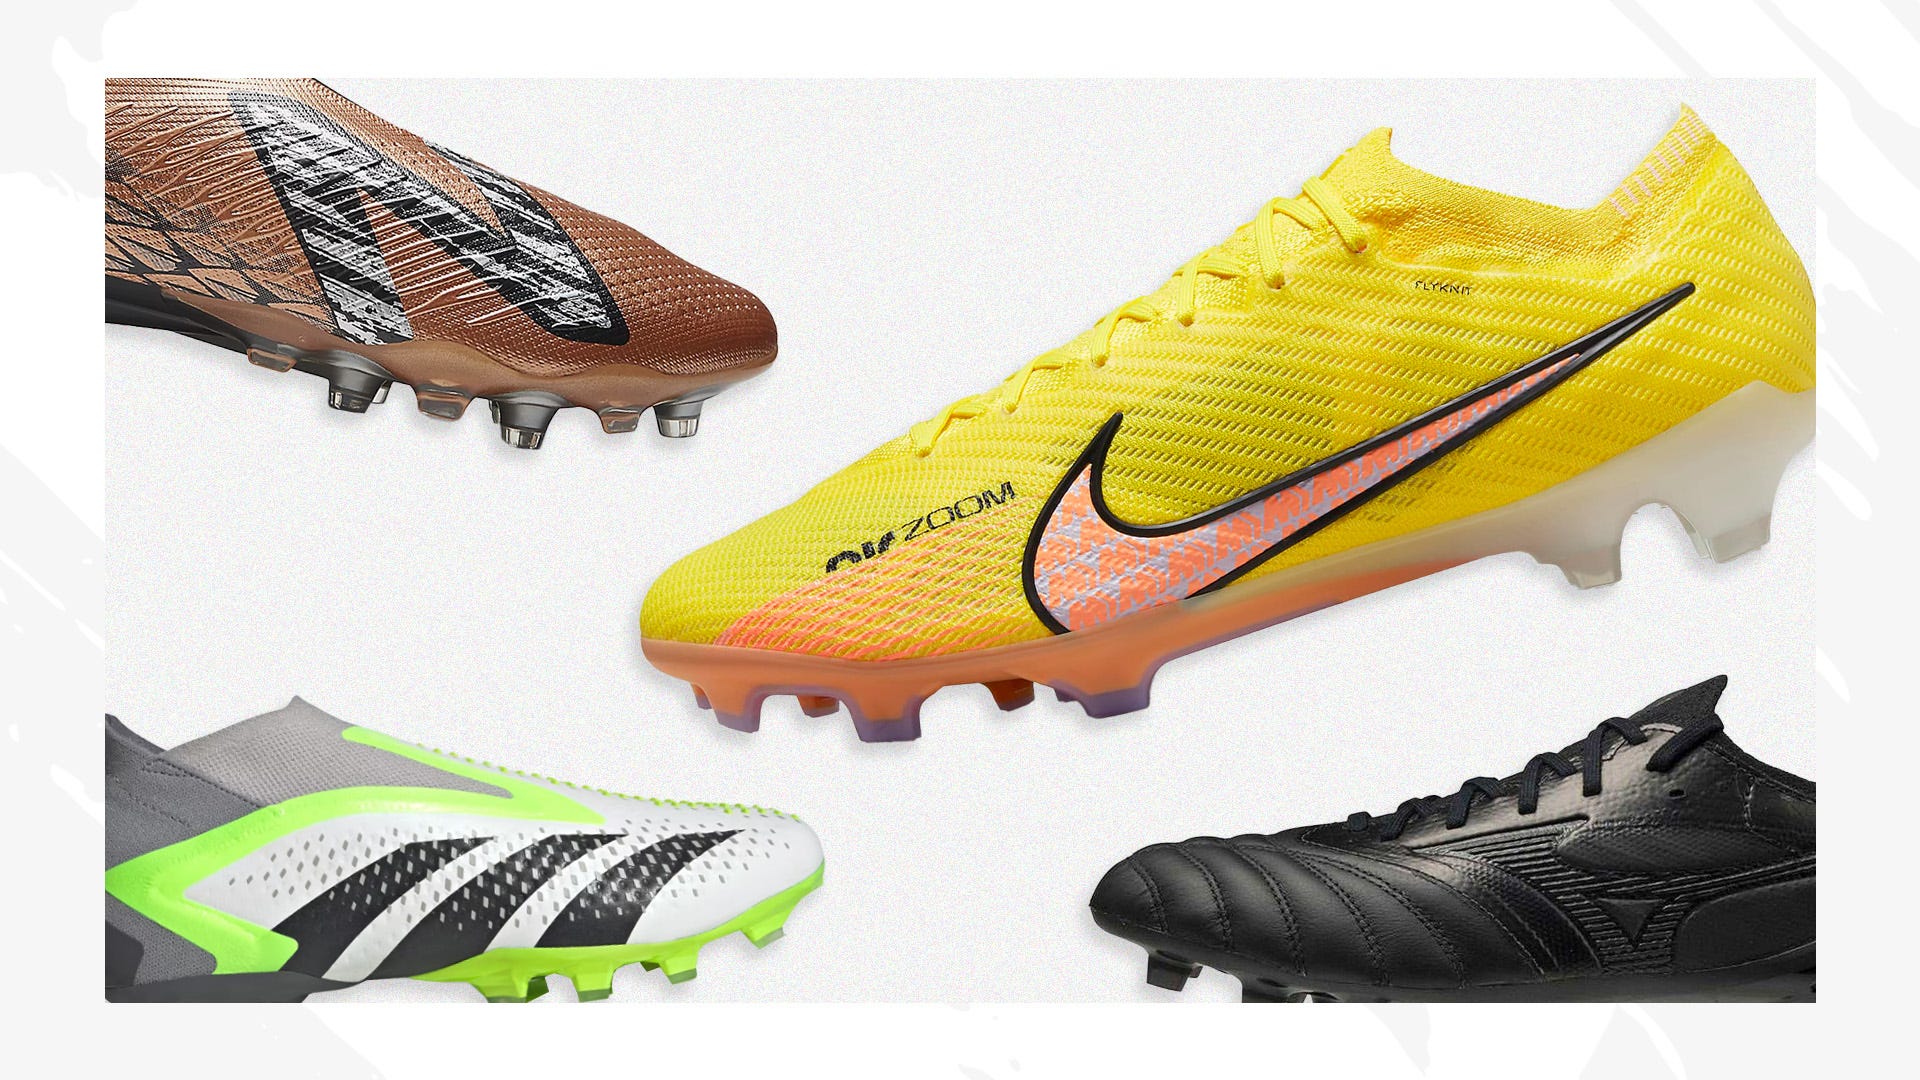 How To Pick The Best Soccer Cleats For Toddlers - Soccer Cleats 101